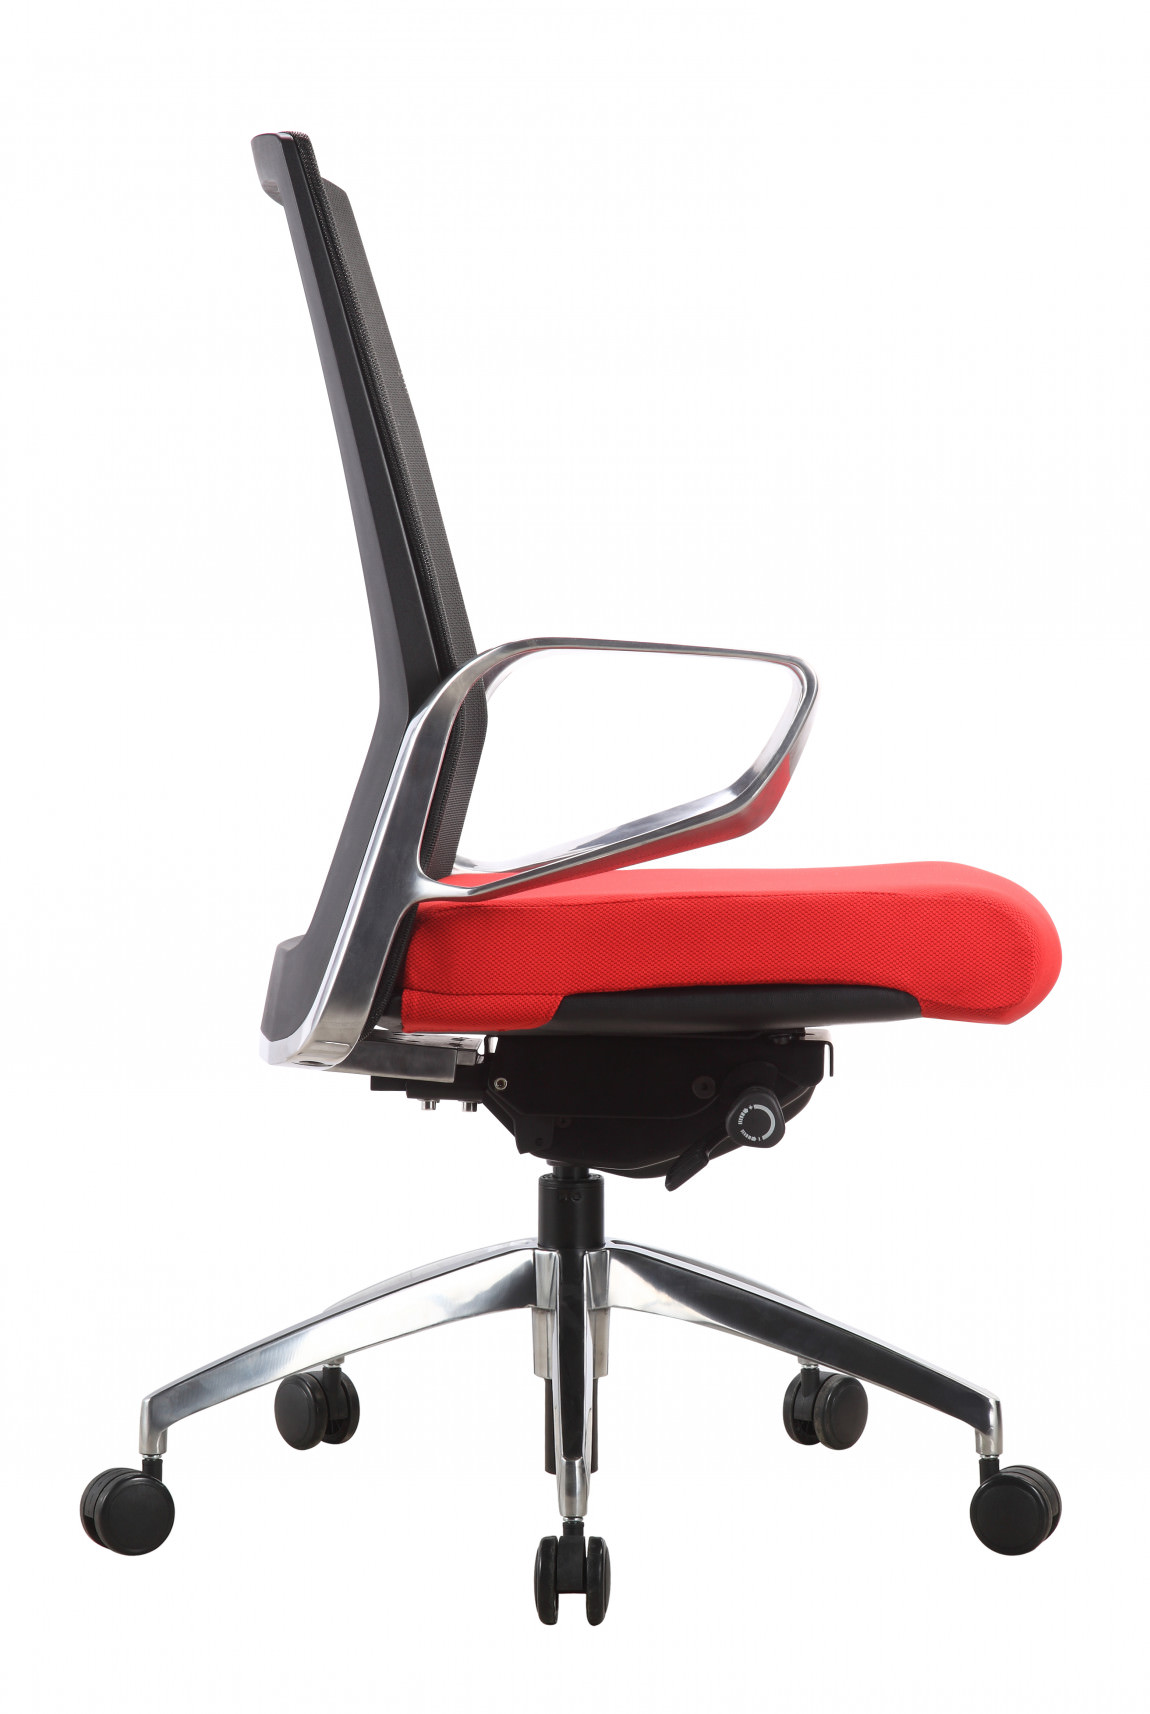 Executive Task Chair with Red Seat Cover